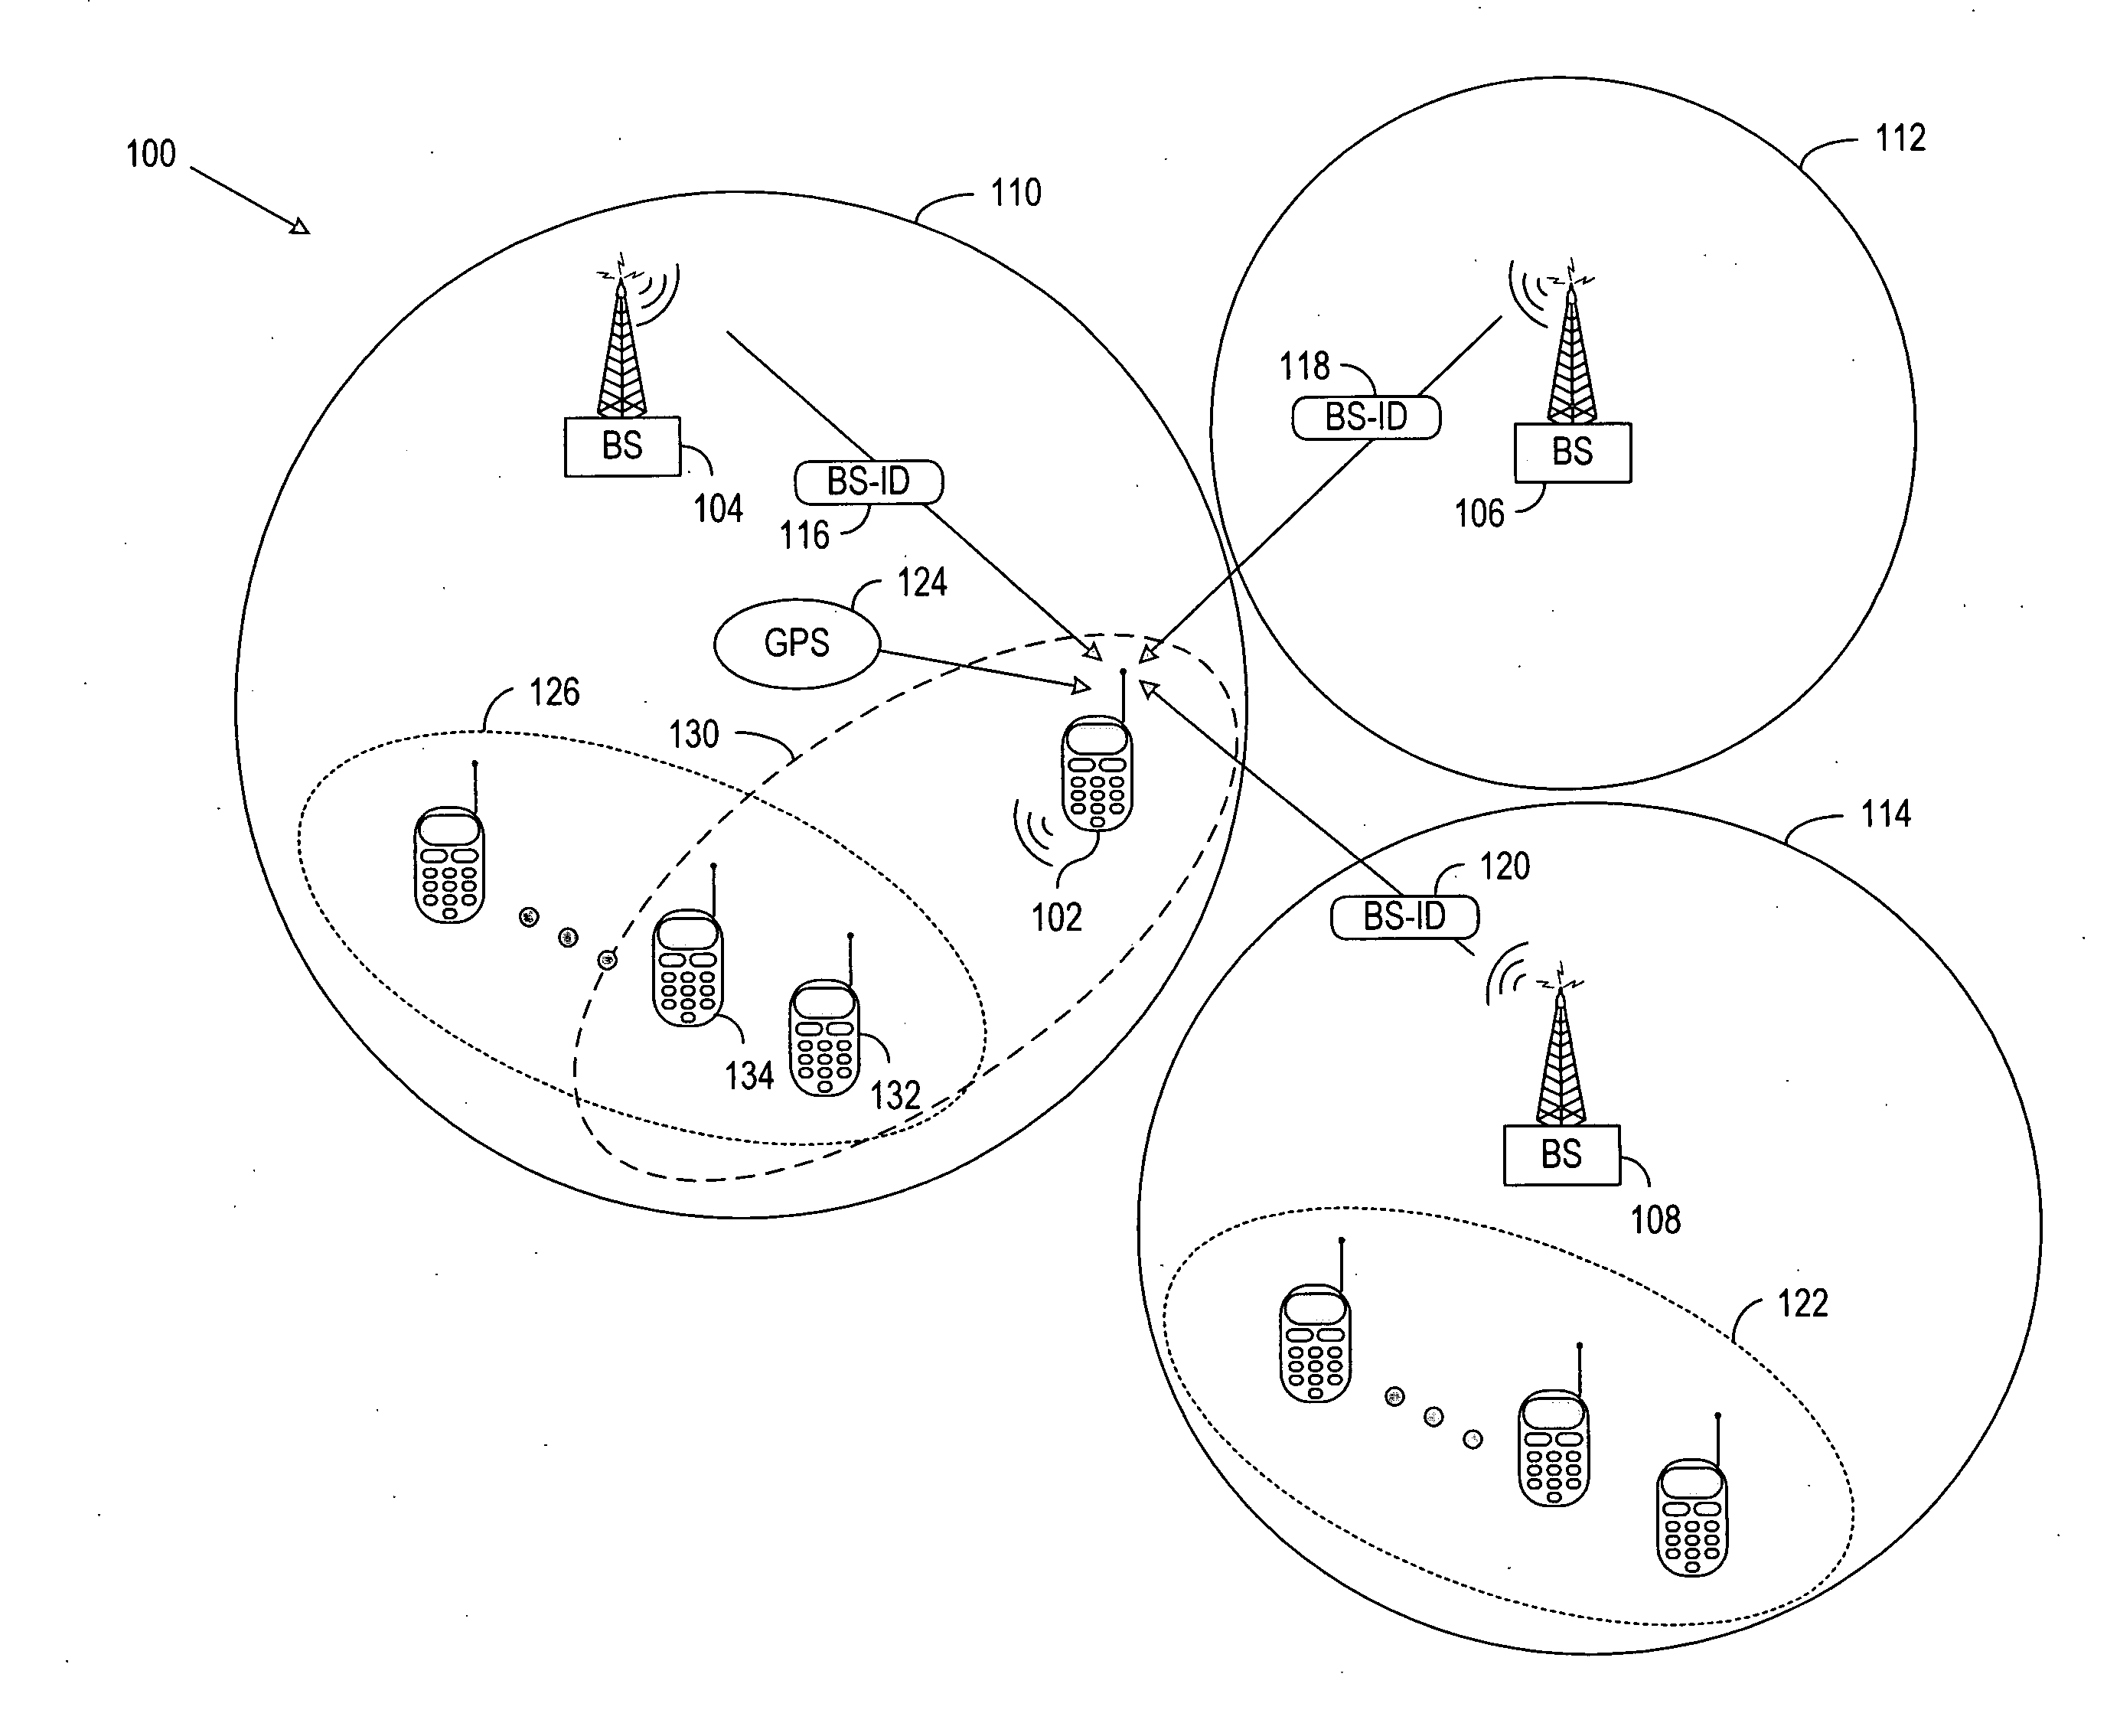 Method and system for location based group formation